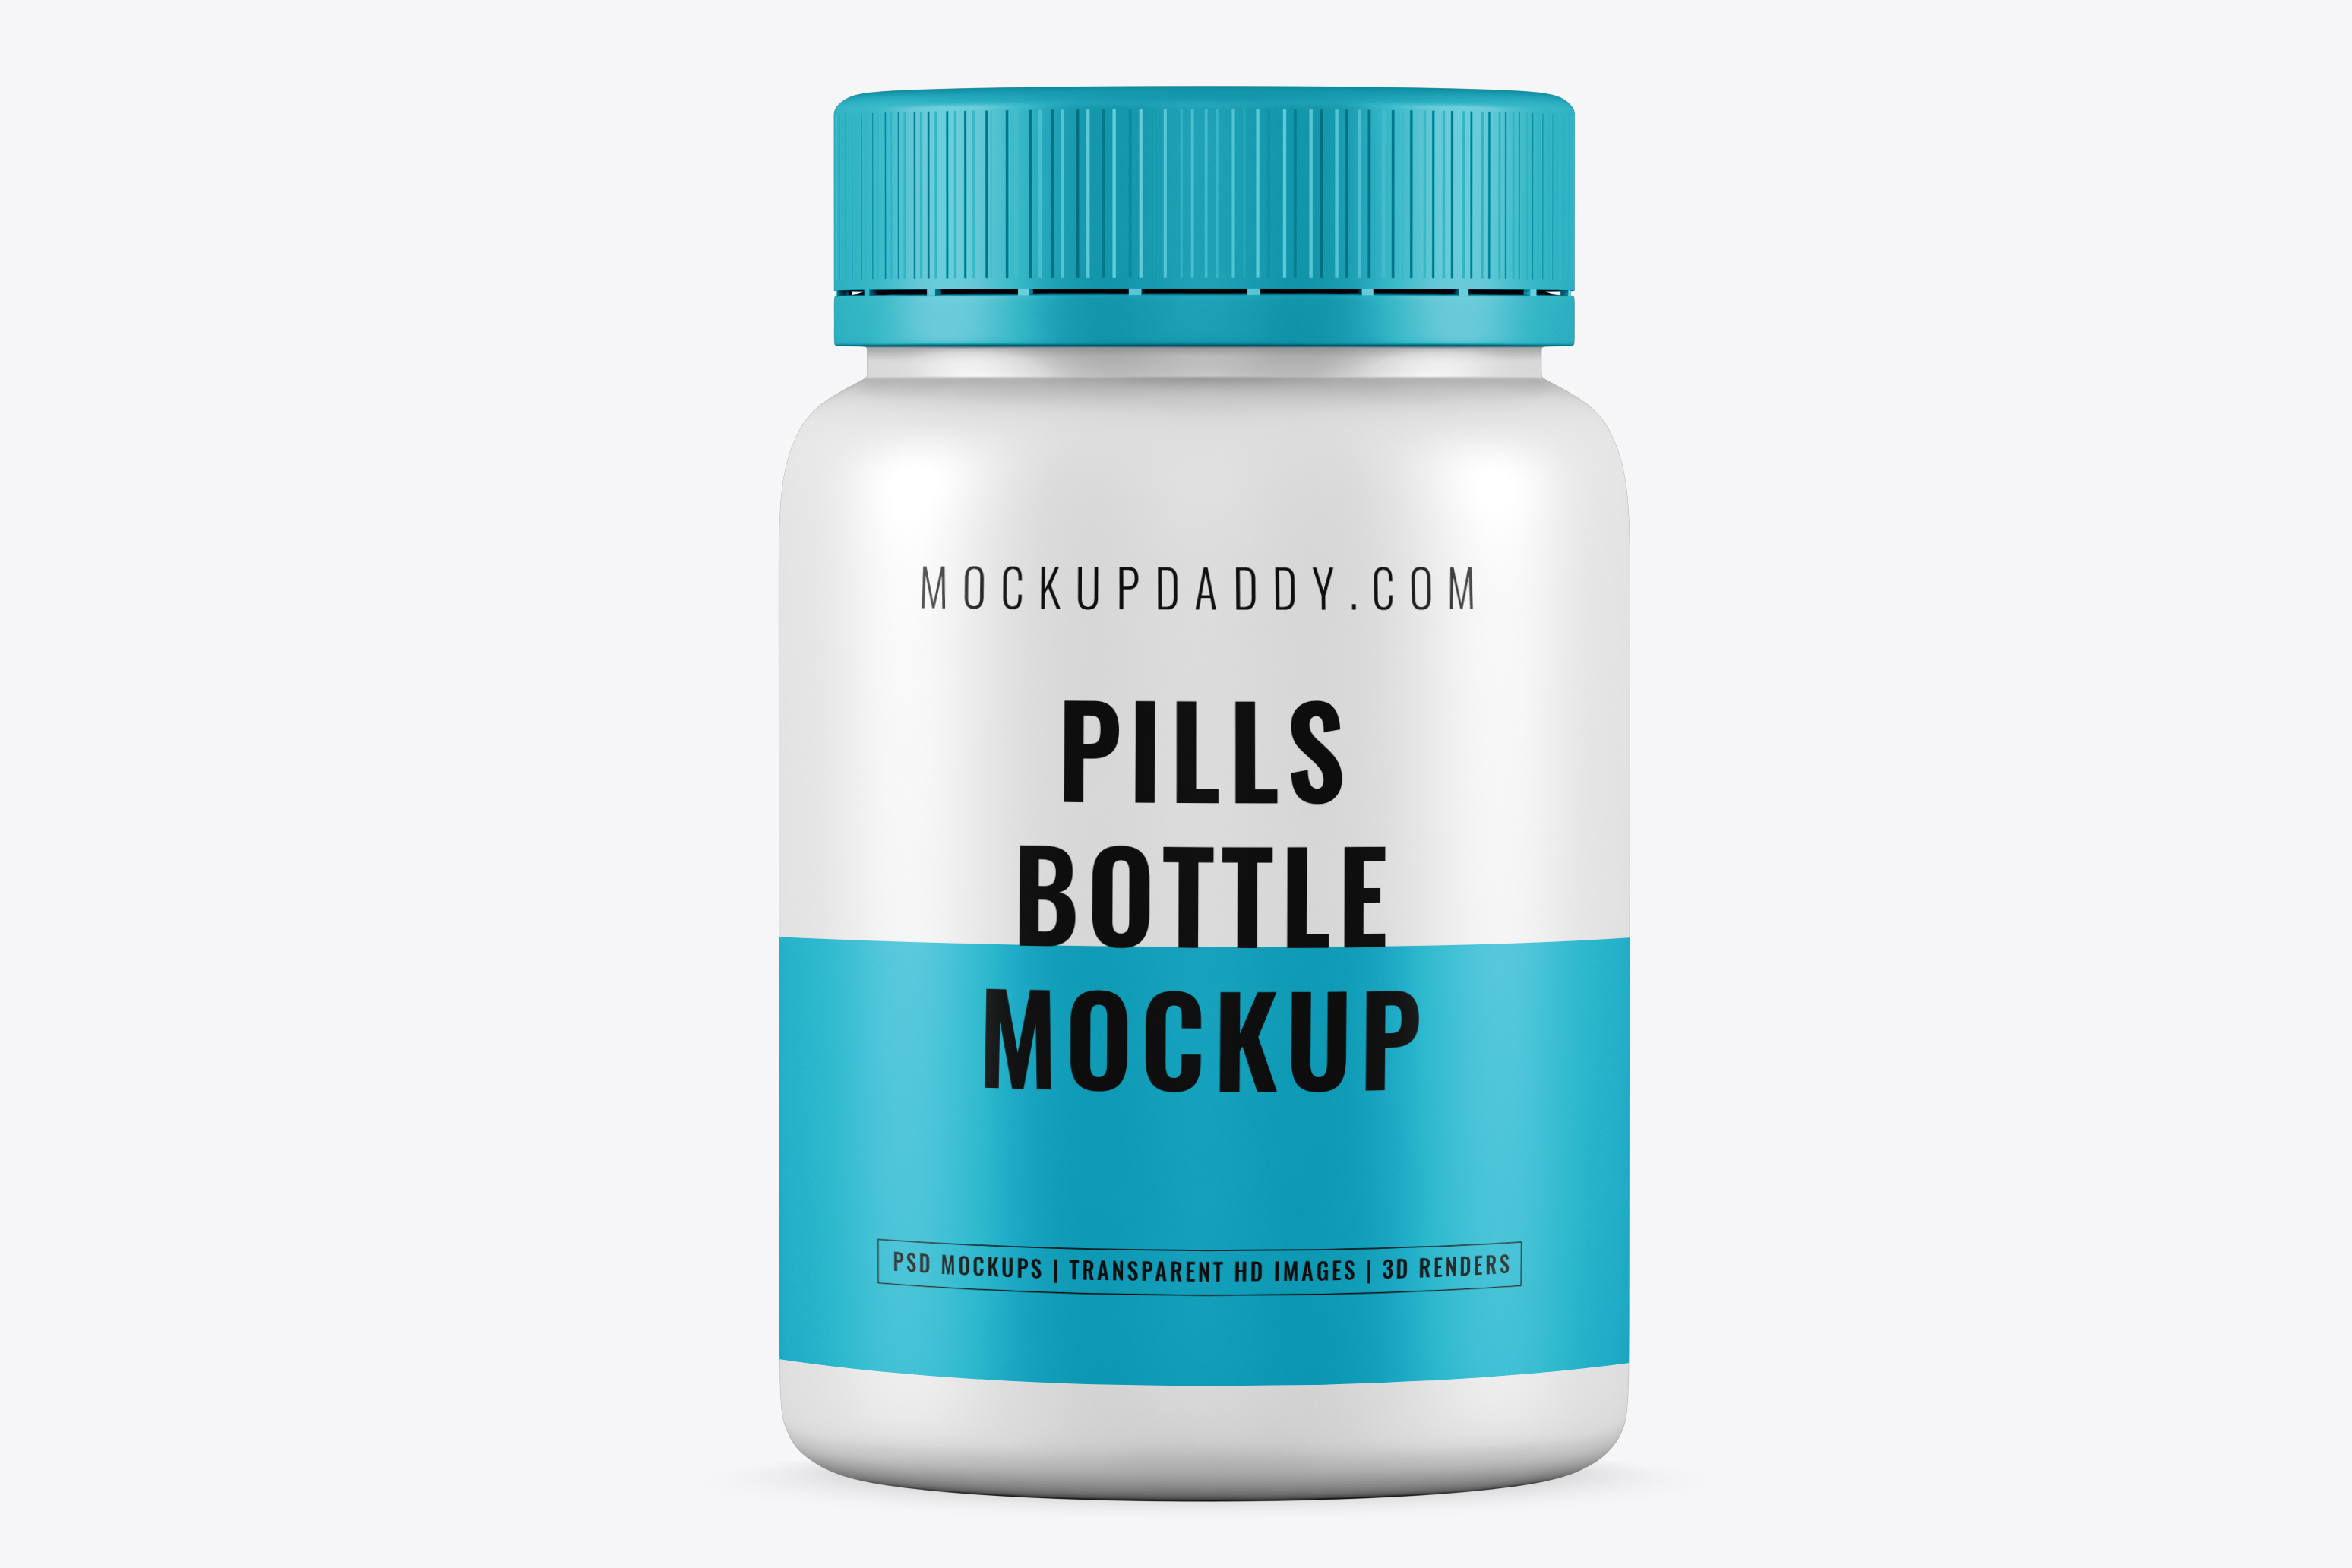 Download Small Pills Bottle Psd Mockup Free Download Mockup Daddy Yellowimages Mockups